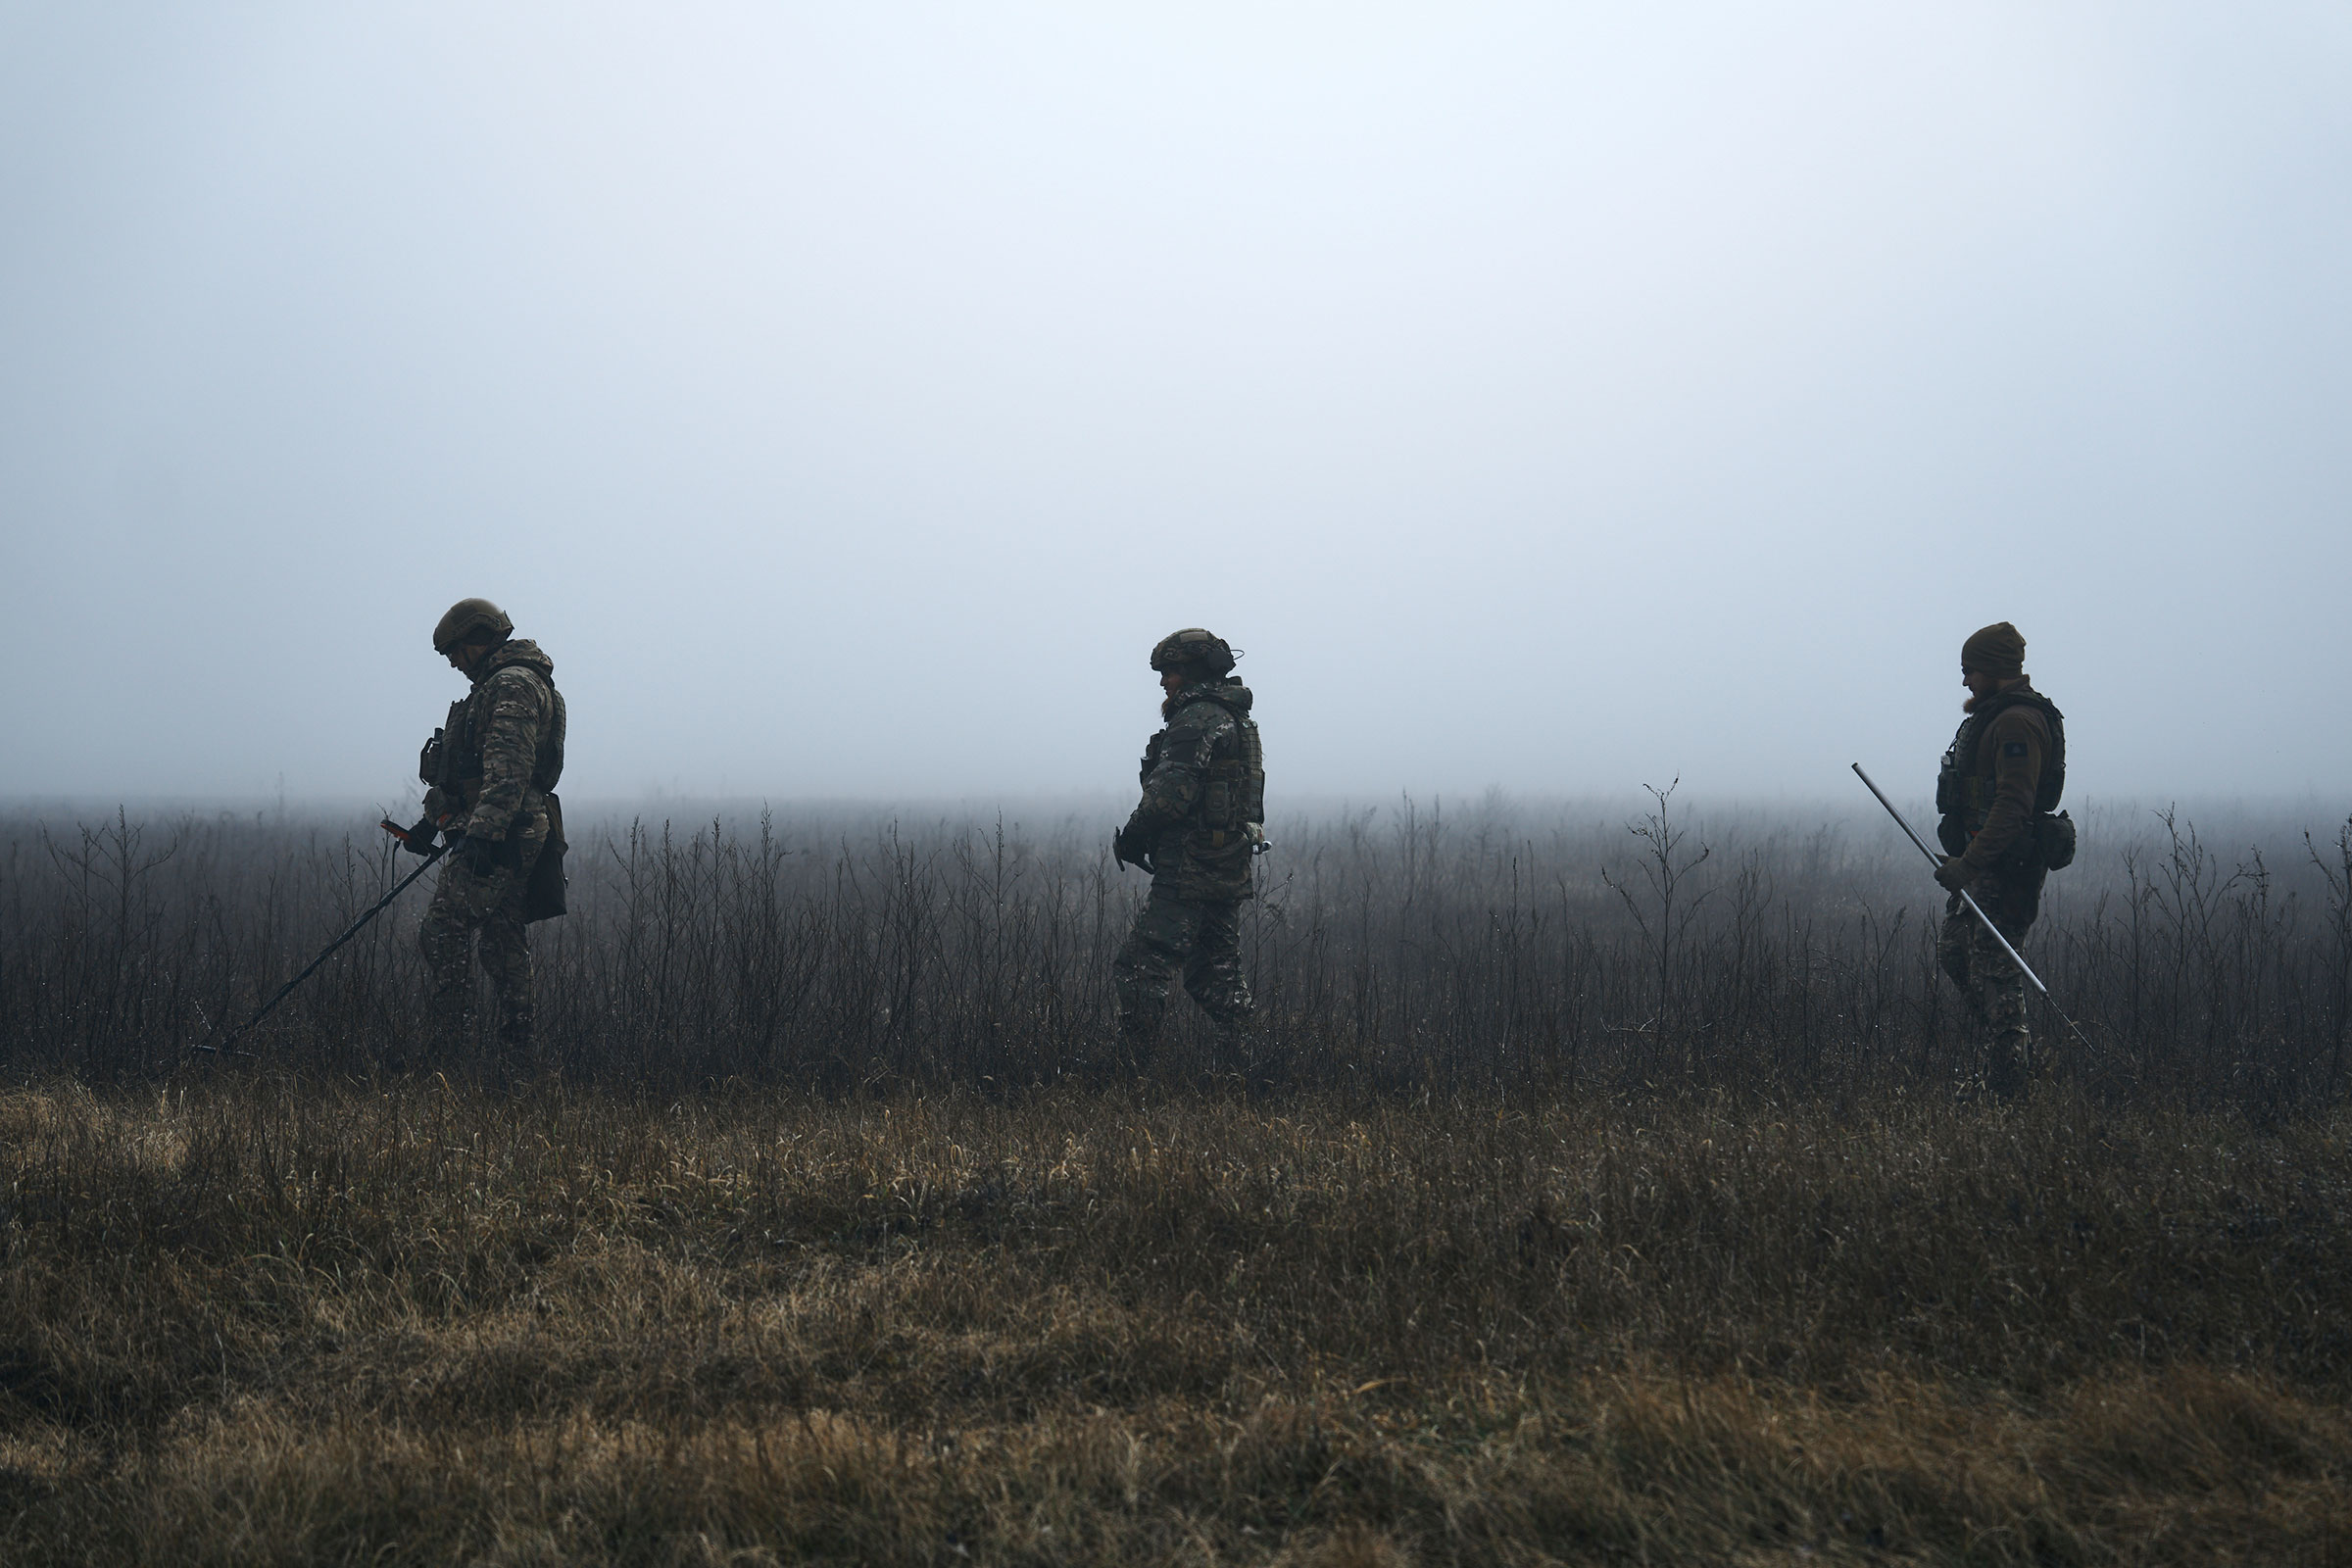 Ukrainian military sappers demine the road in a fog close to Kherson, Ukraine, on Feb. 3, 2023.